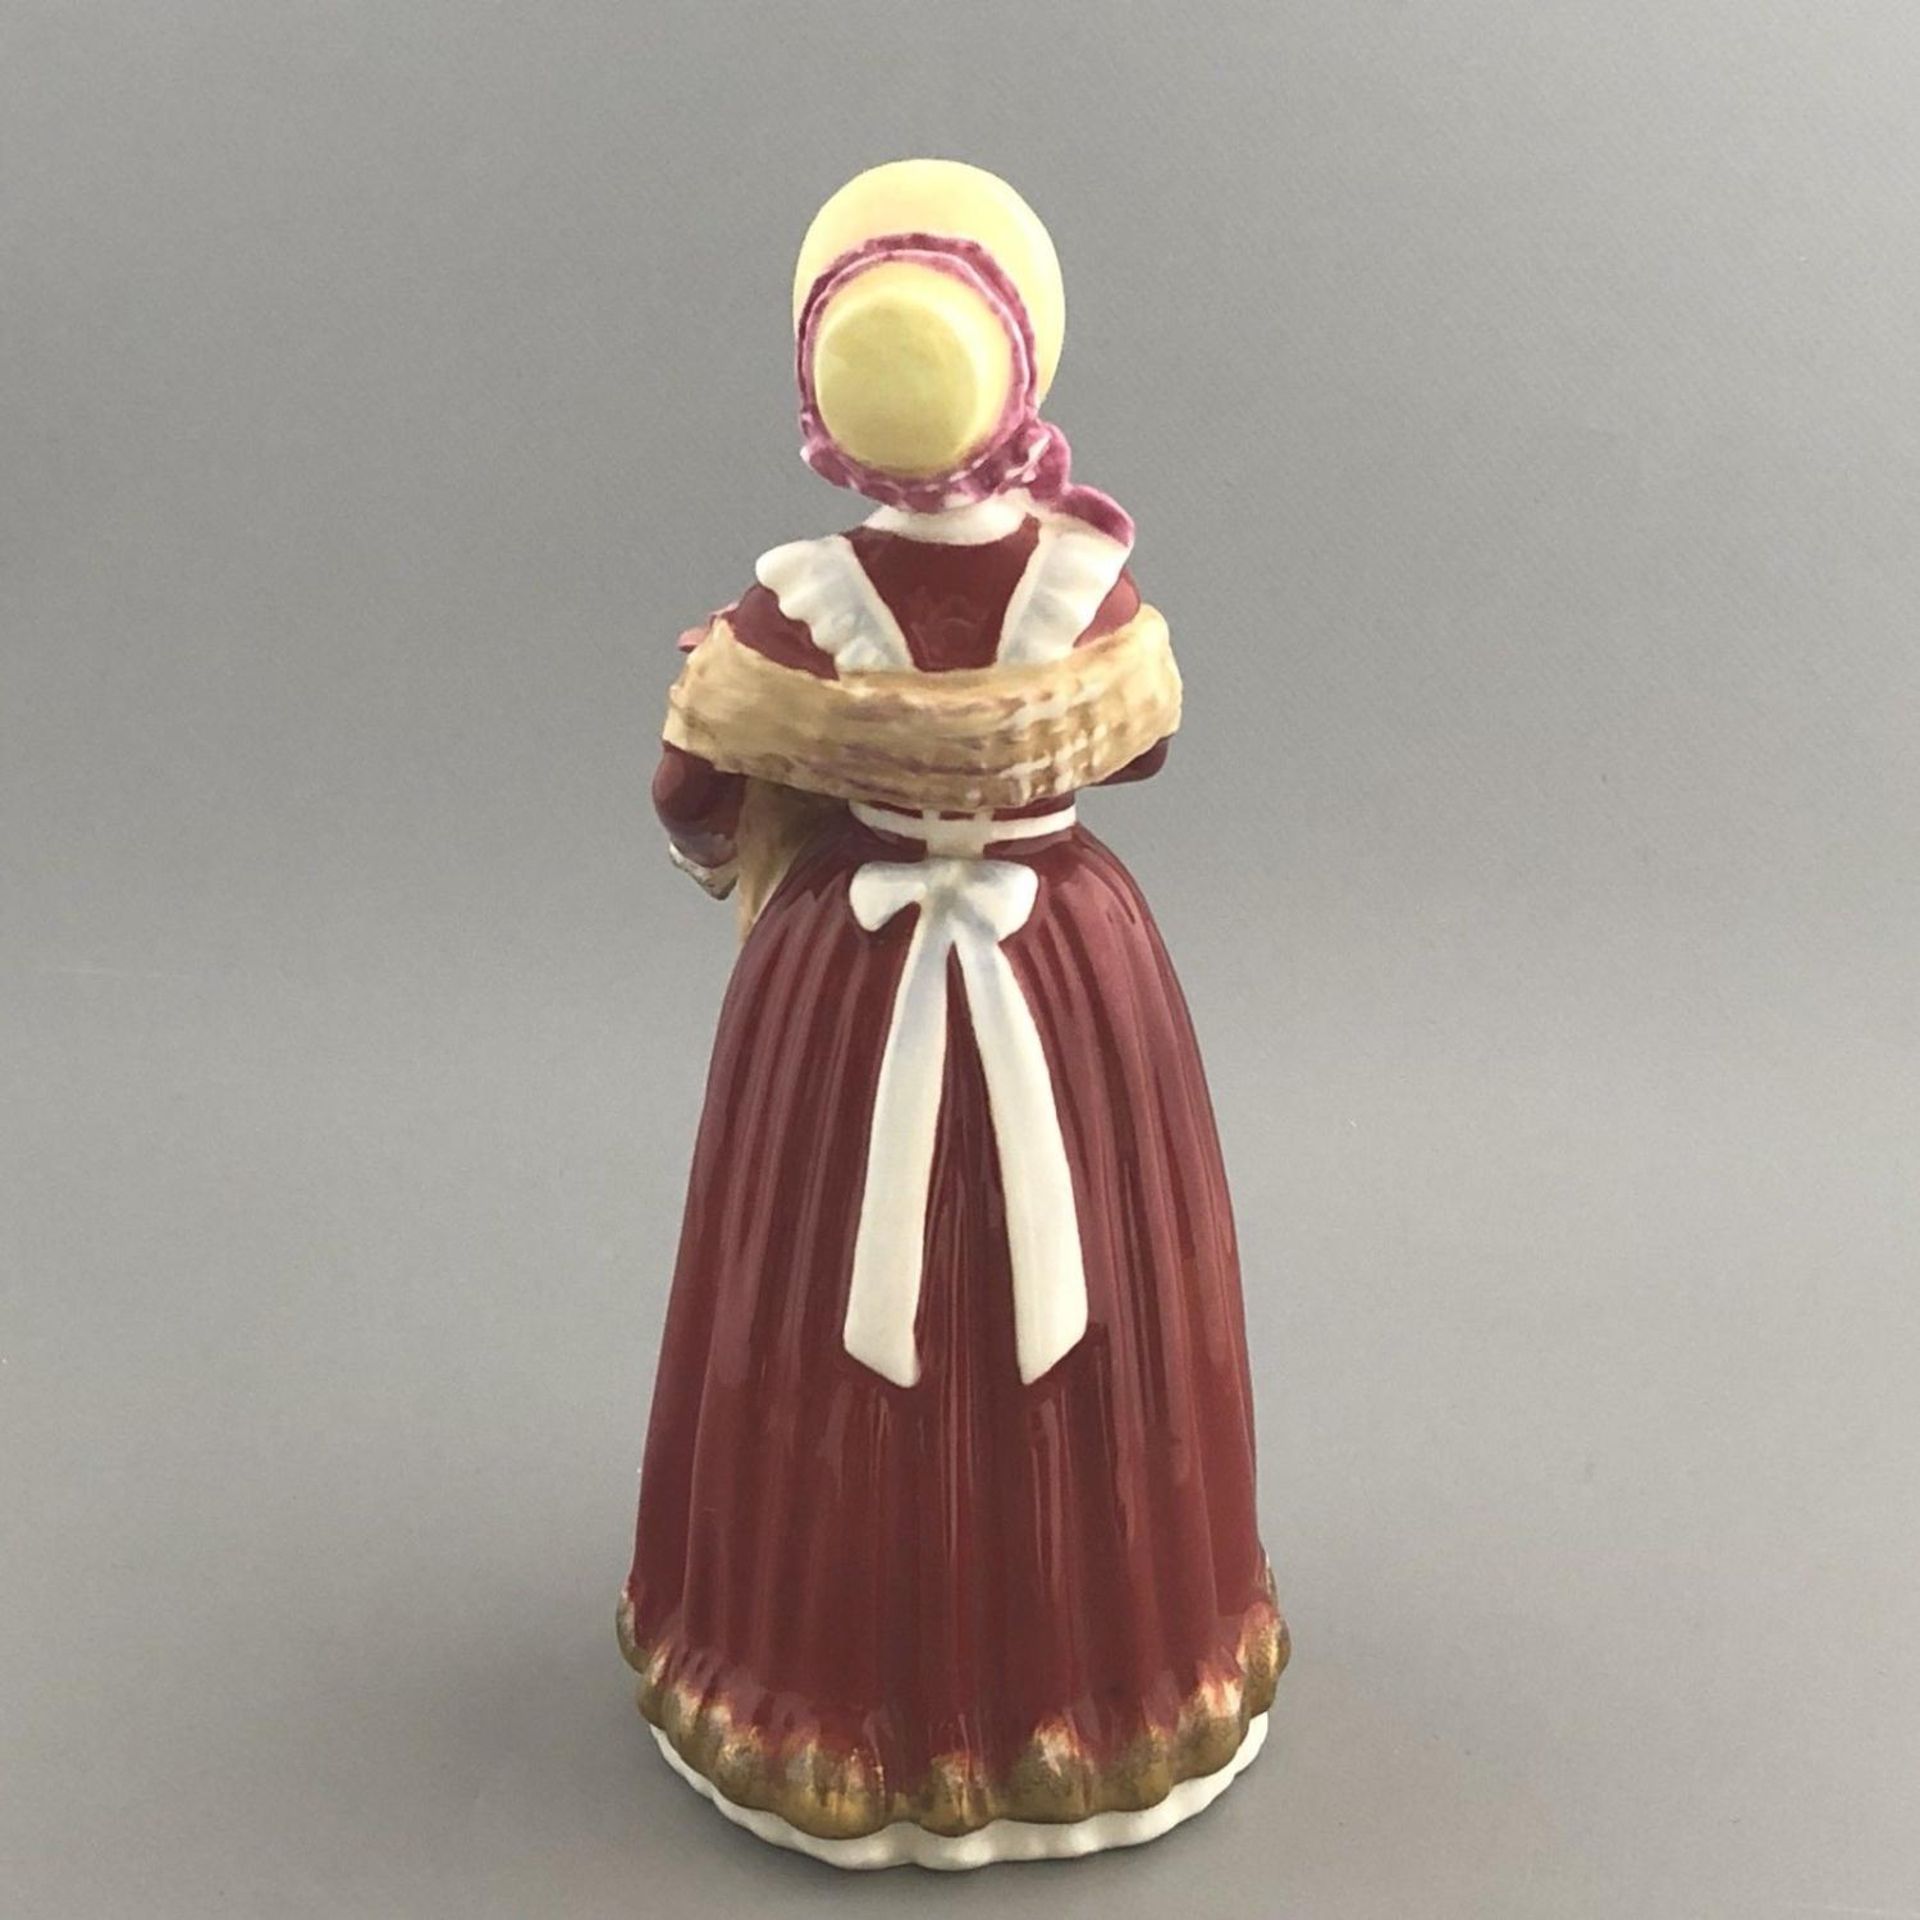 English Porcelain Figurine "Old Country Roses" - Royal Doulton HN 3692 - Image 3 of 7